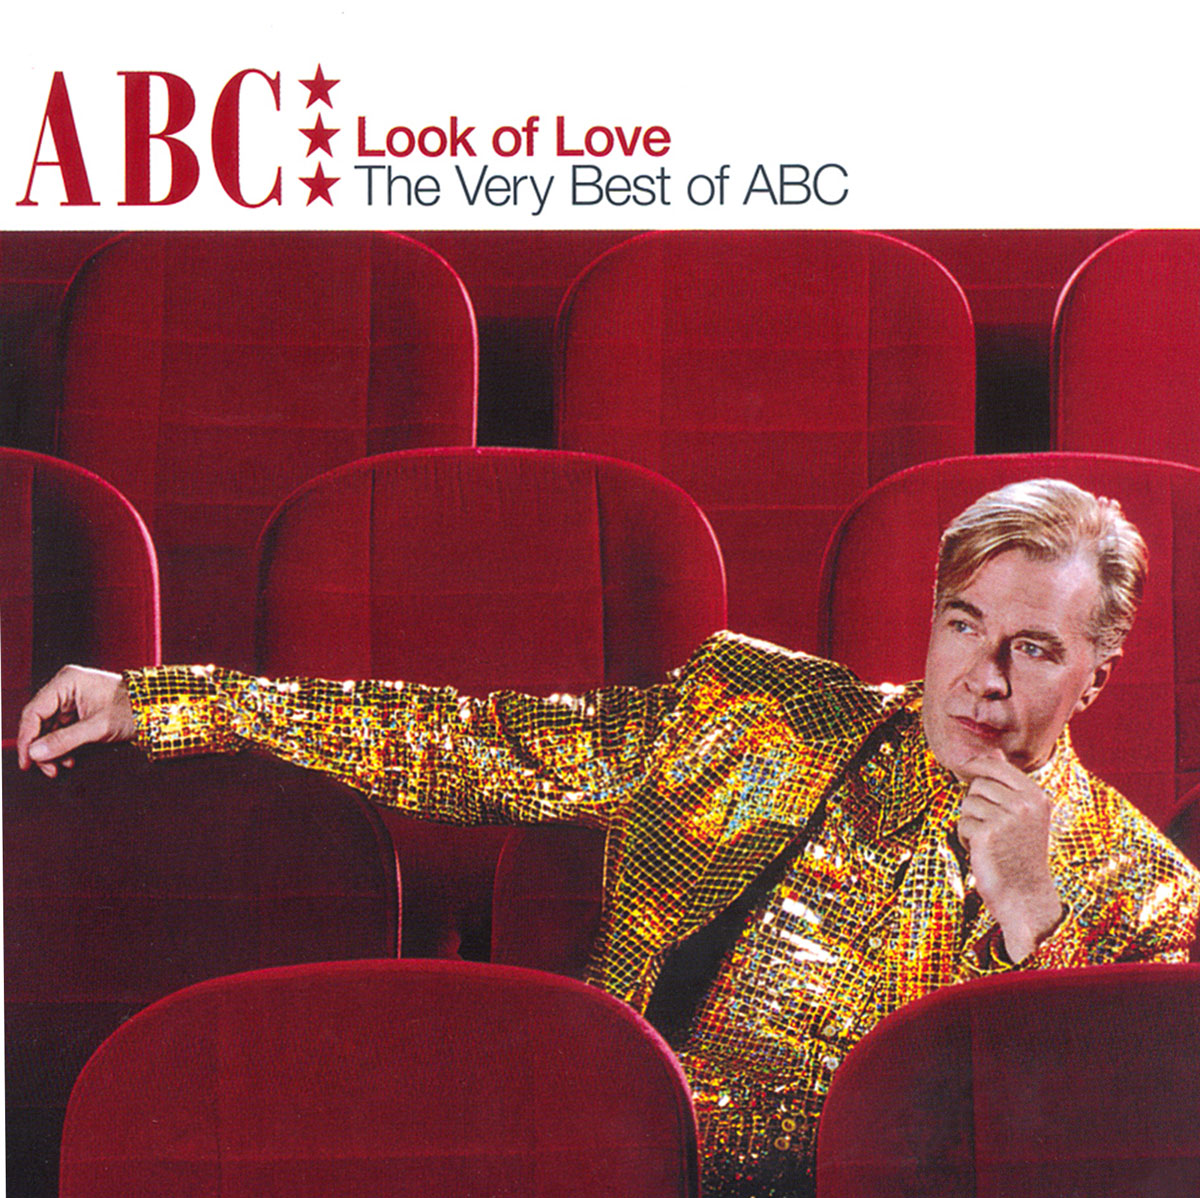 The album cover for ABC’s two thousand and two greatest hits album titled “Look of Love: The Very Best of ABC.”